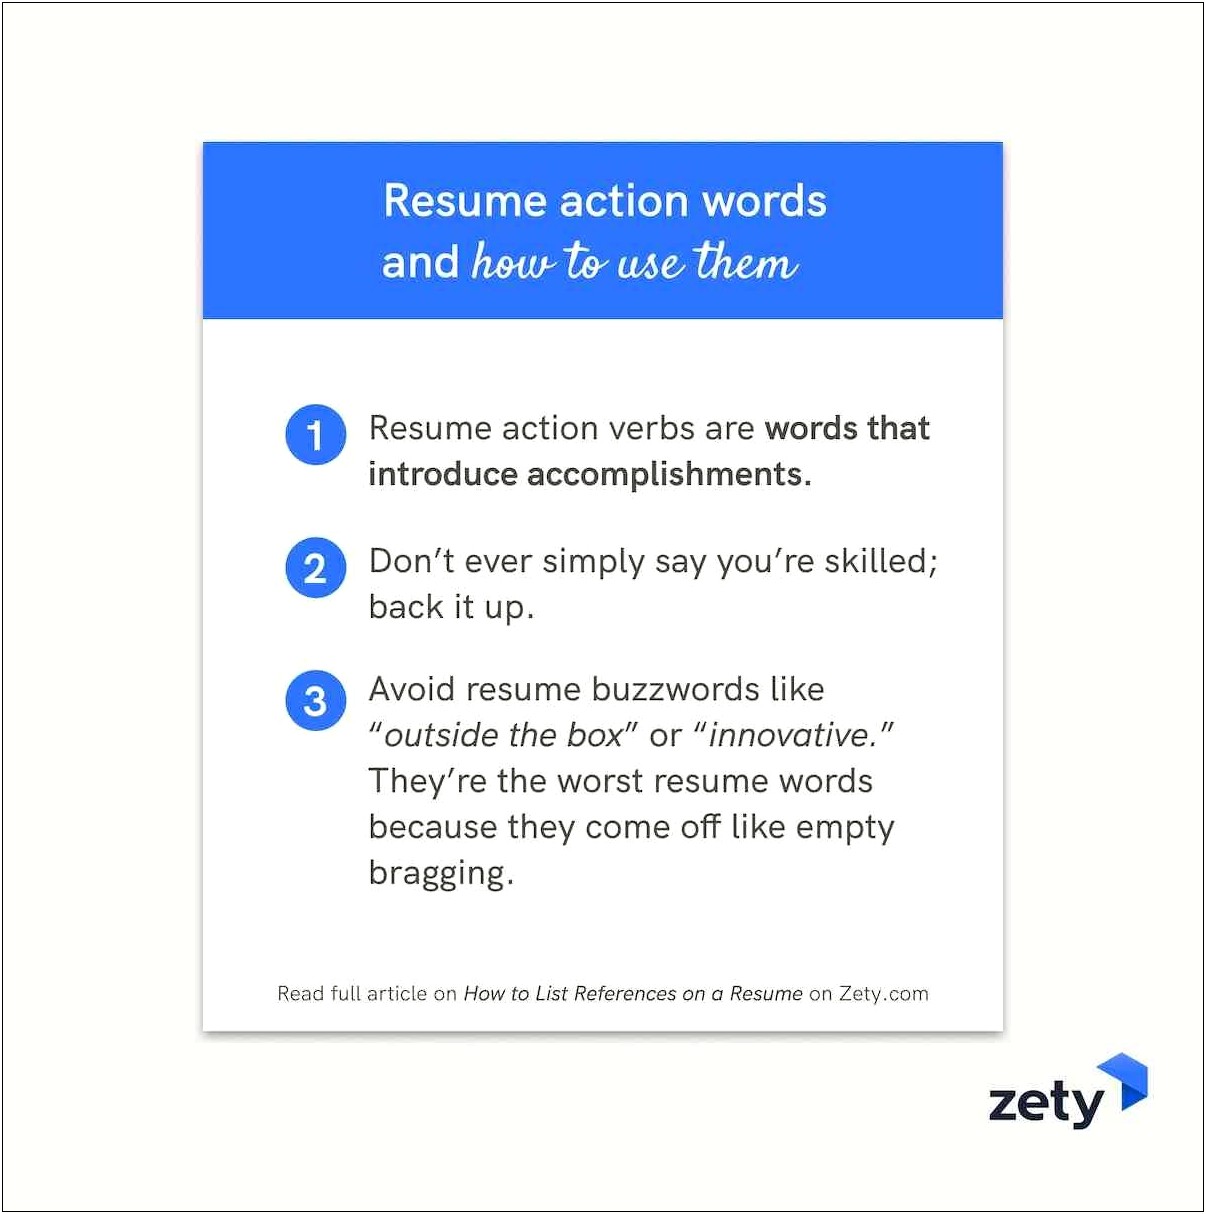 Action Words For Resumes By Category